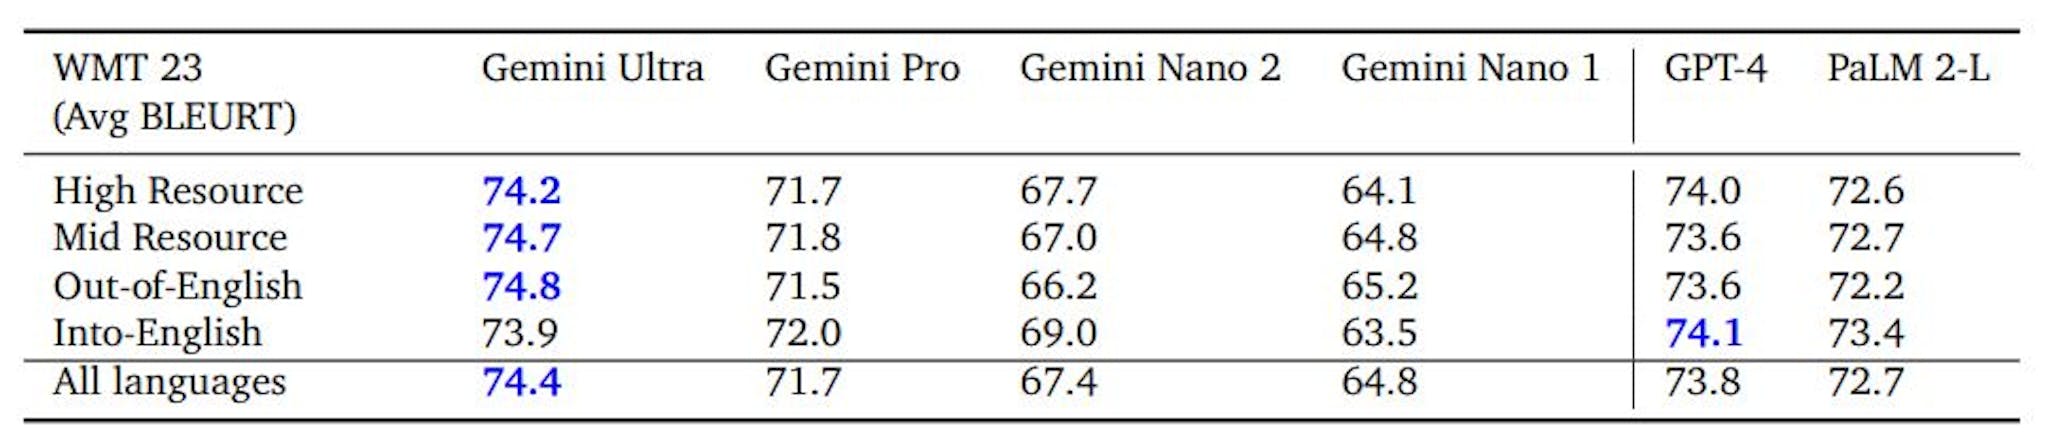 Table 4 | Performance of Gemini models on WMT 23 translation benchmark. All numbers with 1-shot.